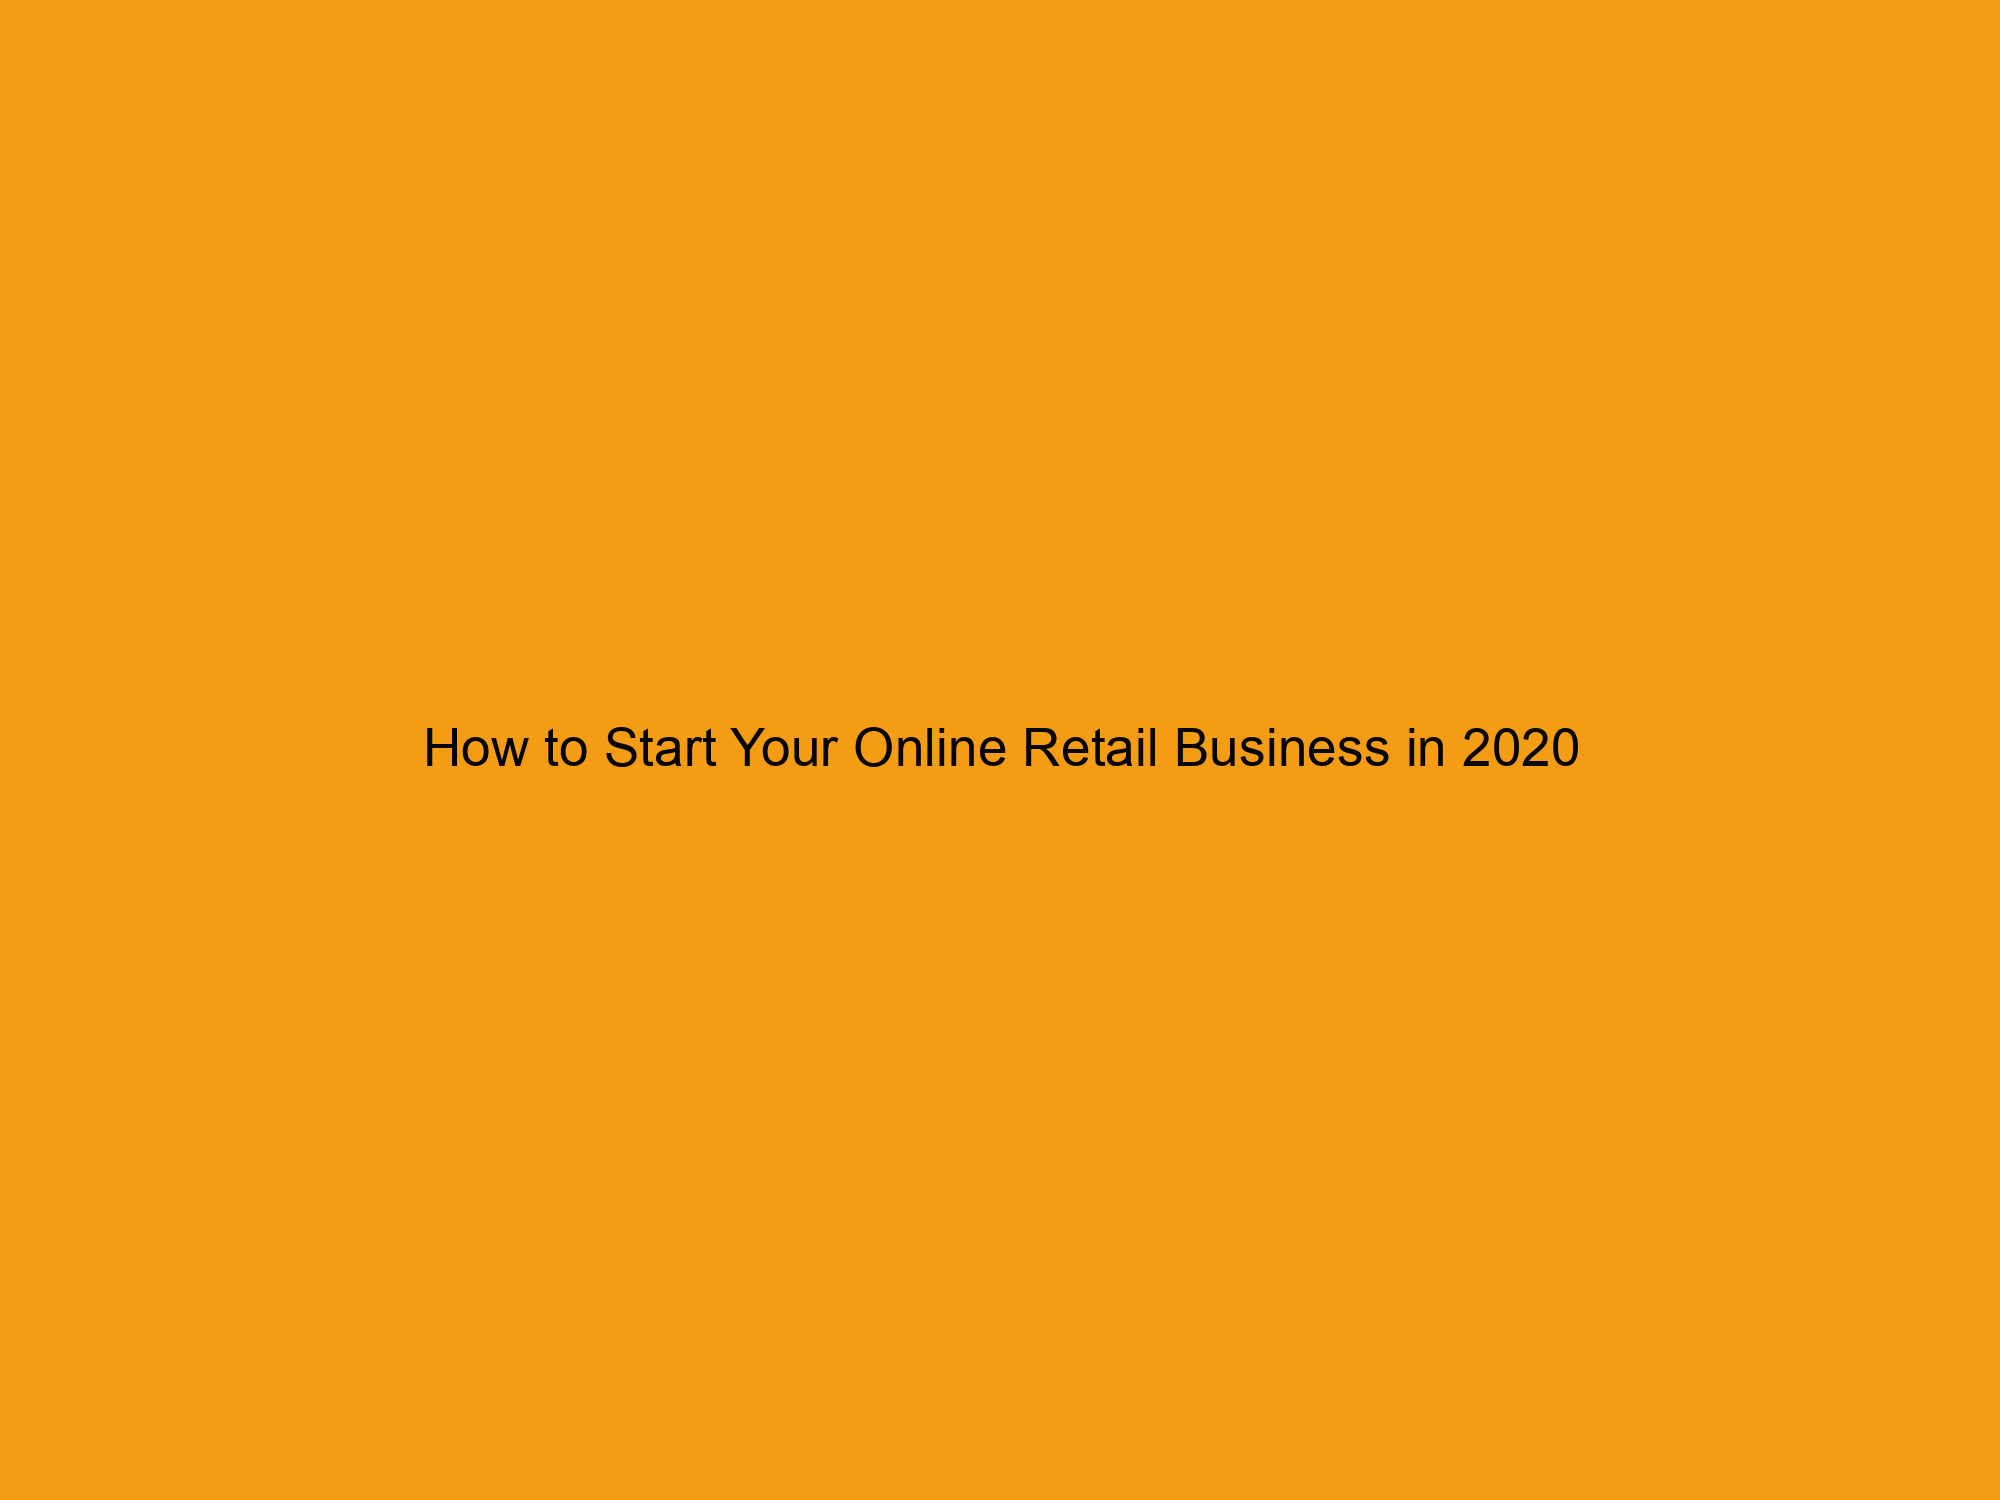 How to Start Your Online Retail Business in 2020